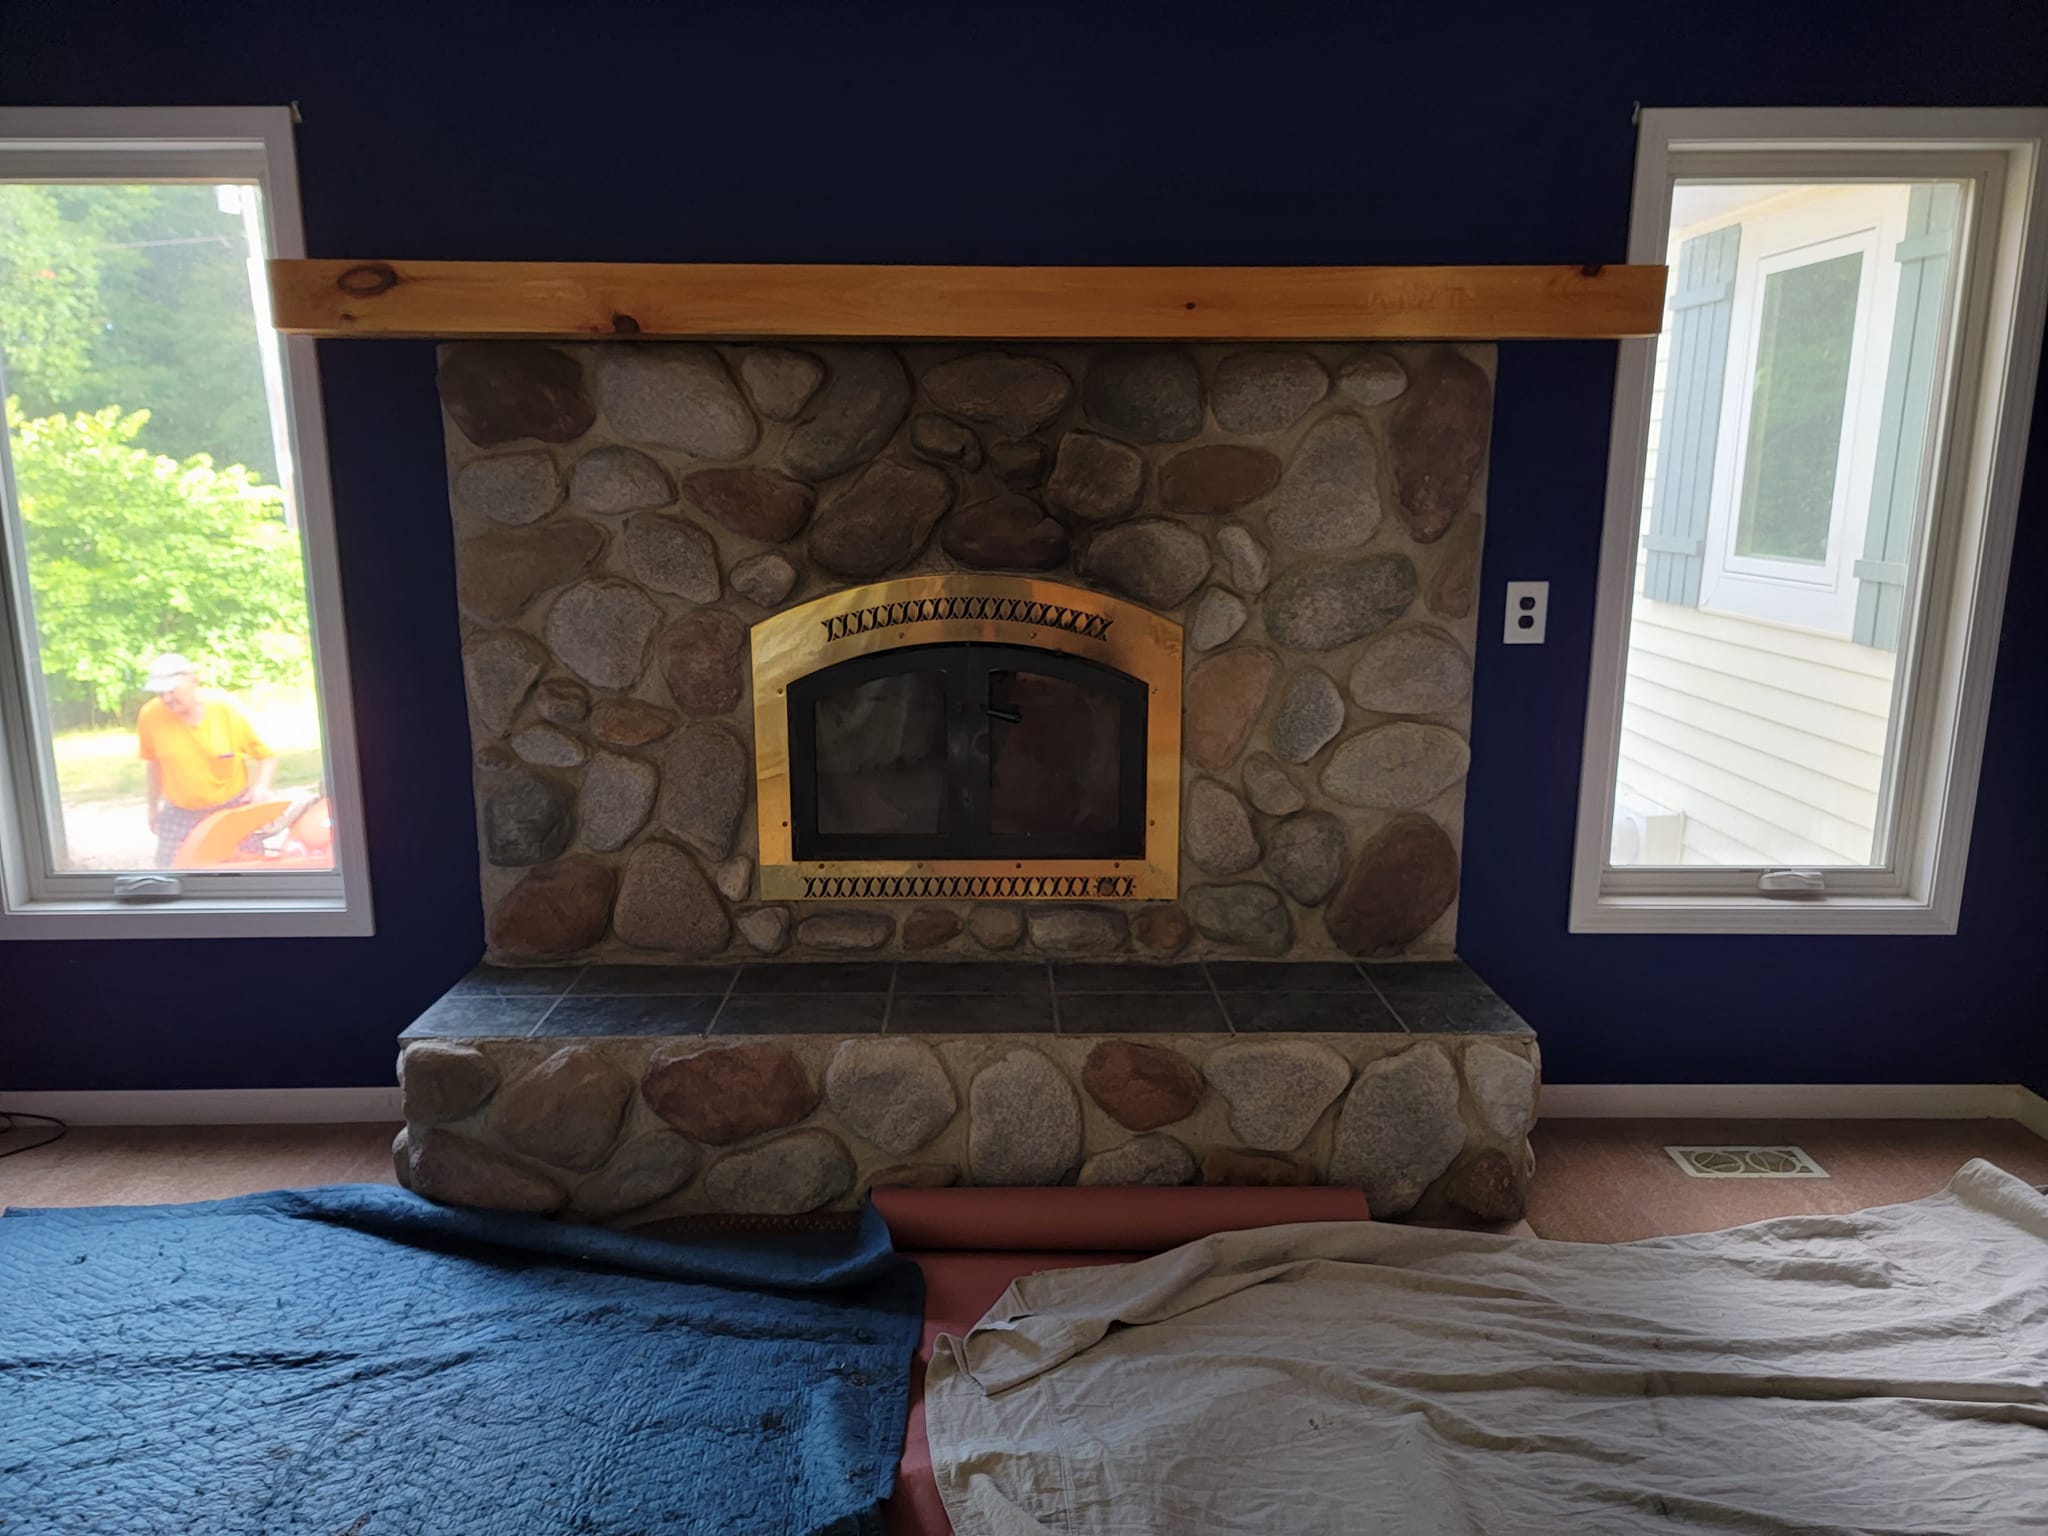 JW Fireplace Sales and Consulting | Old Wood Burning Fireplace Replaced with New Gas Fireplace